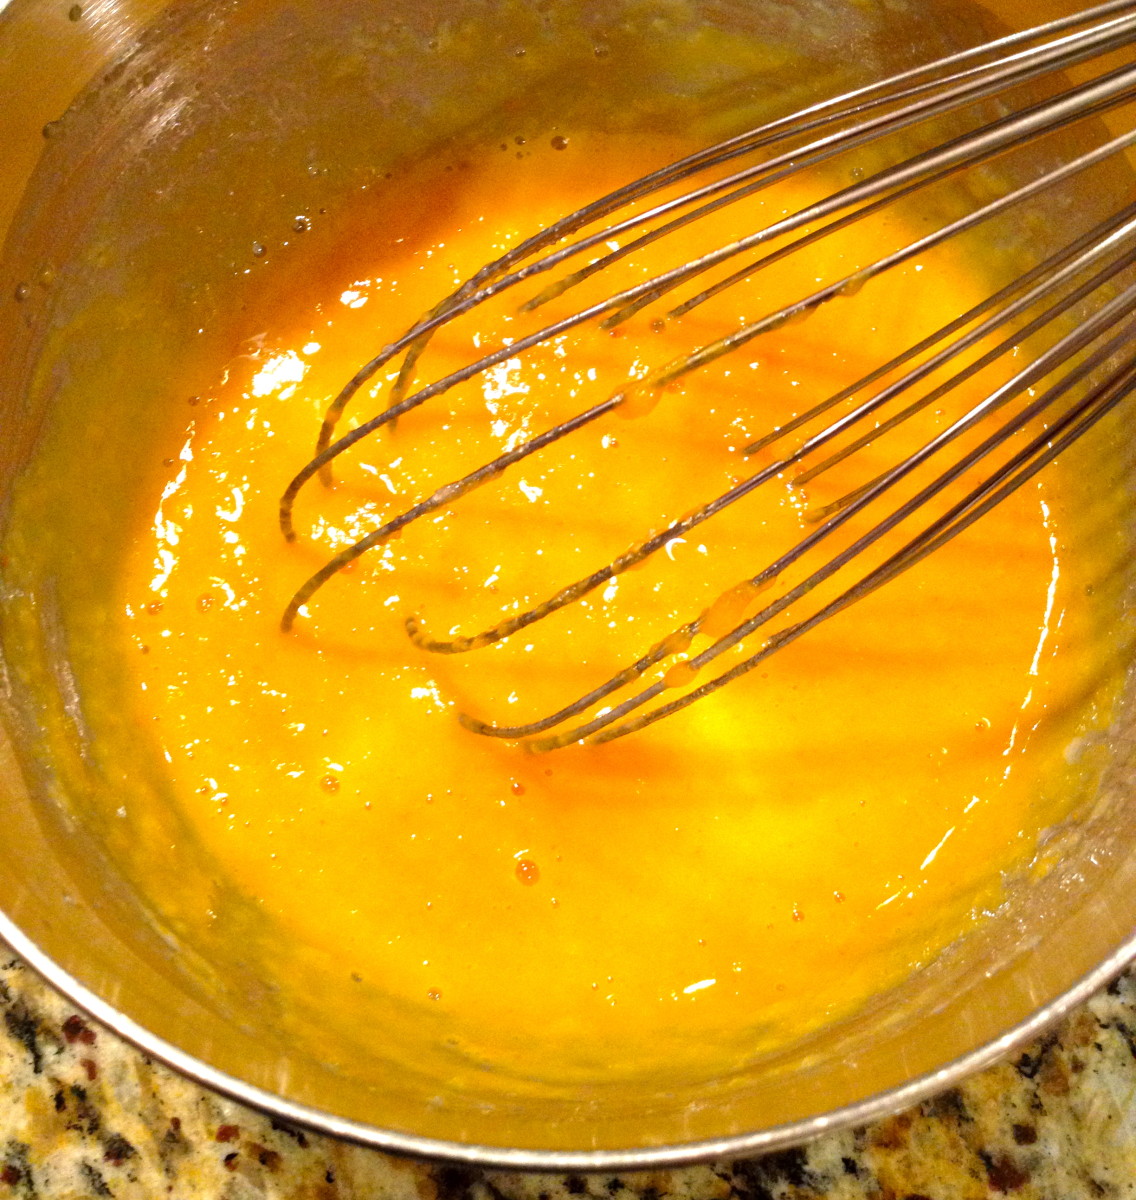 Whisk egg in a smaller bowl and add pumpkin, sugar, applesauce, almond milk, and vanilla. Stir to combine.